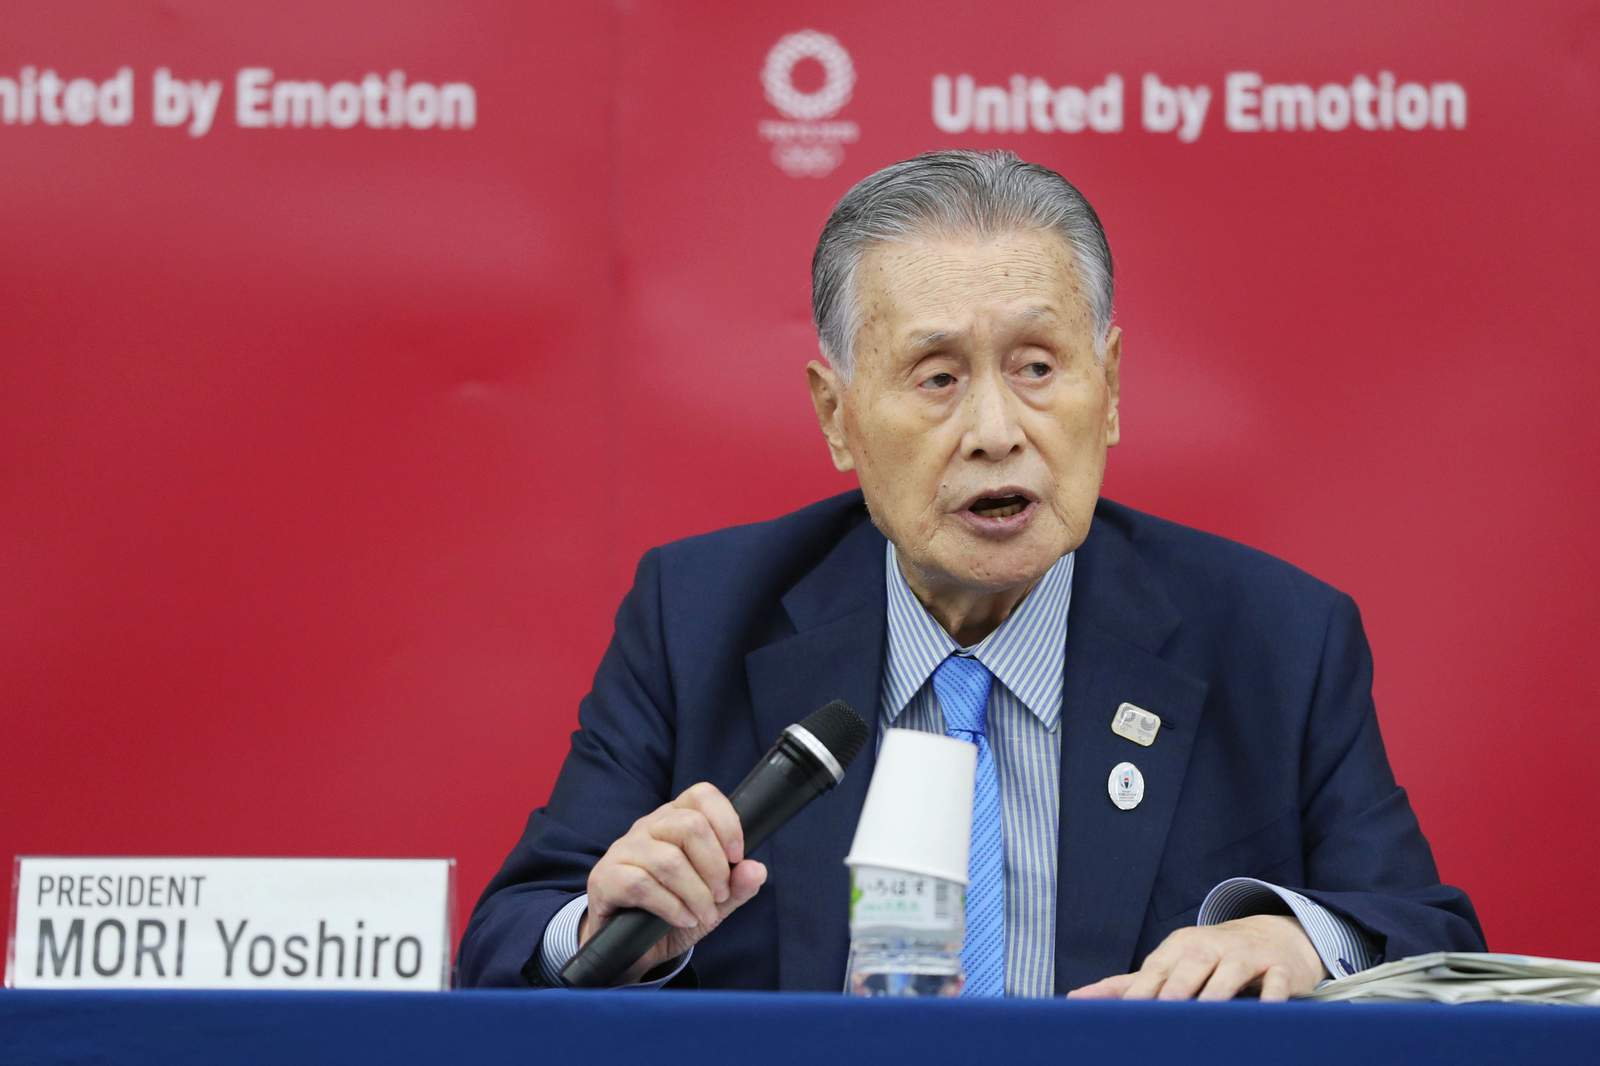 Tokyo head: Olympics not possible under current conditions